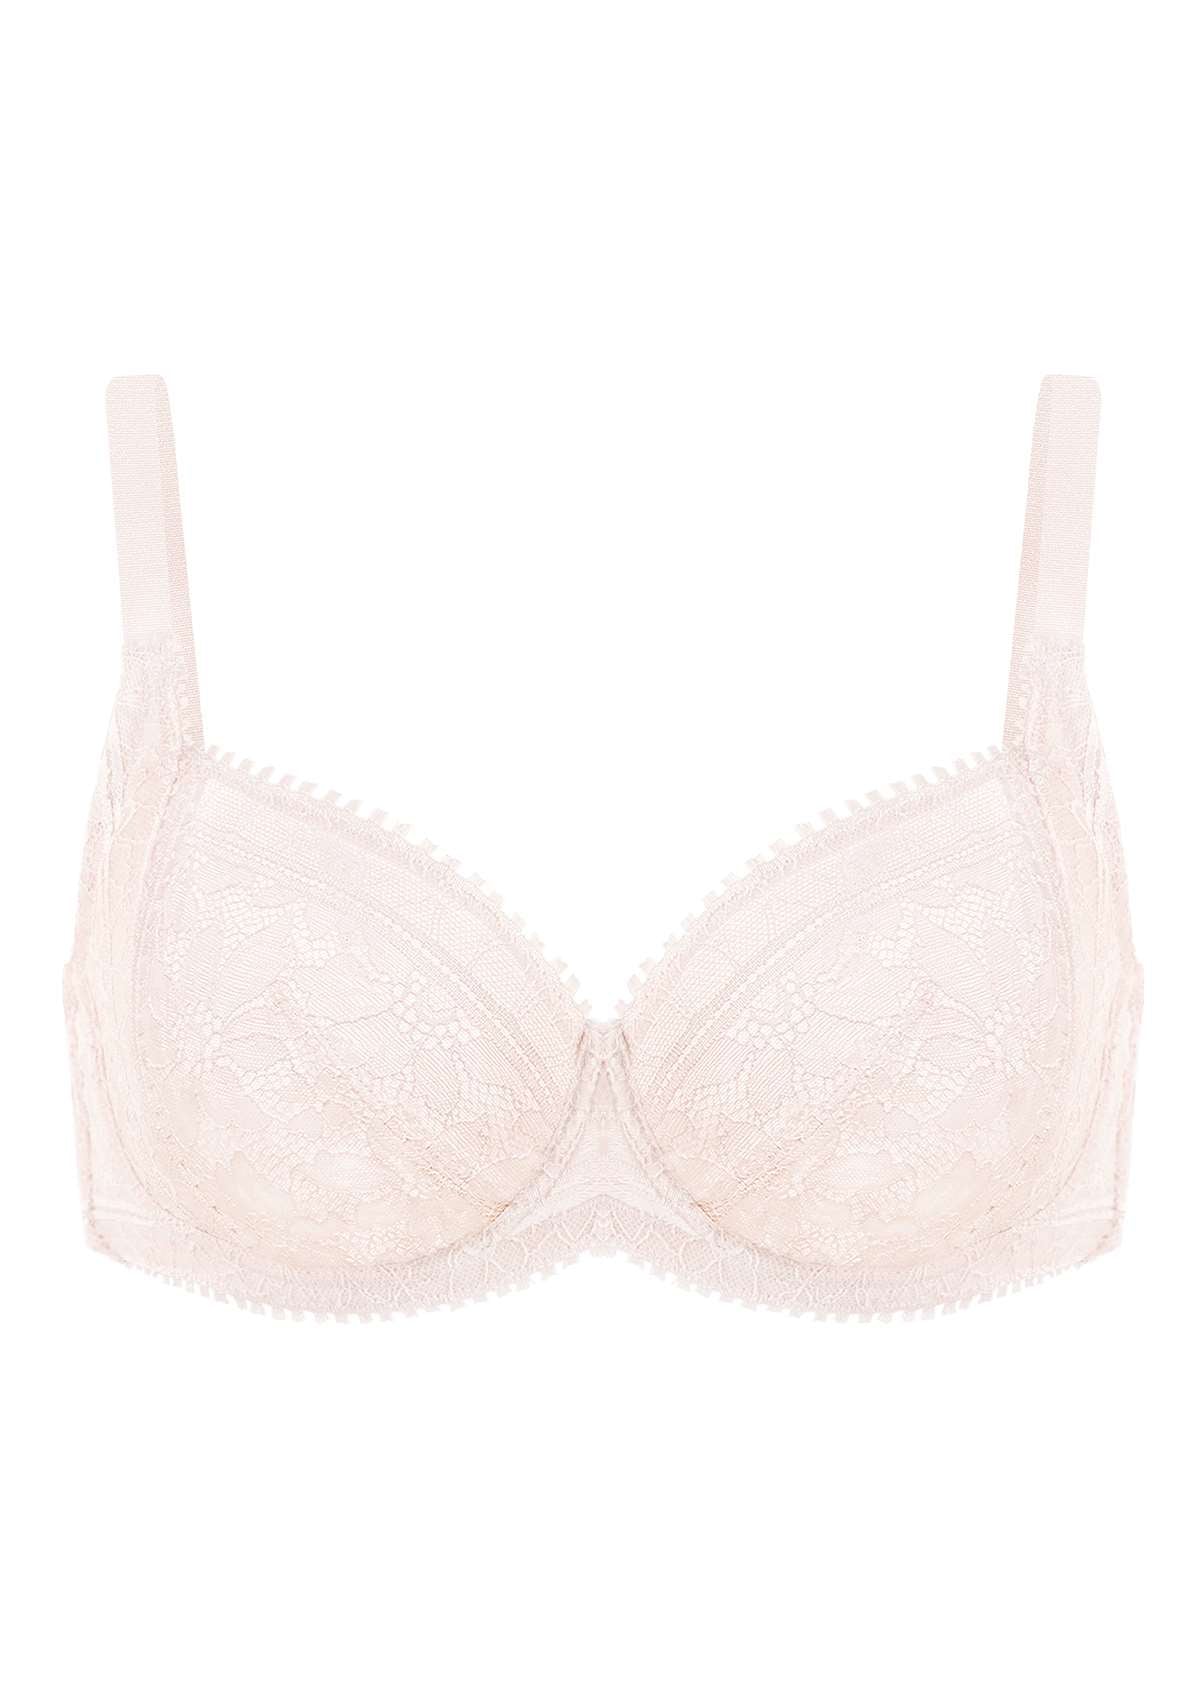 HSIA Silene Floral Delicate Unlined Lace Soft Cup Uplift Bra - Heavenly Pink / 42 / DD/E